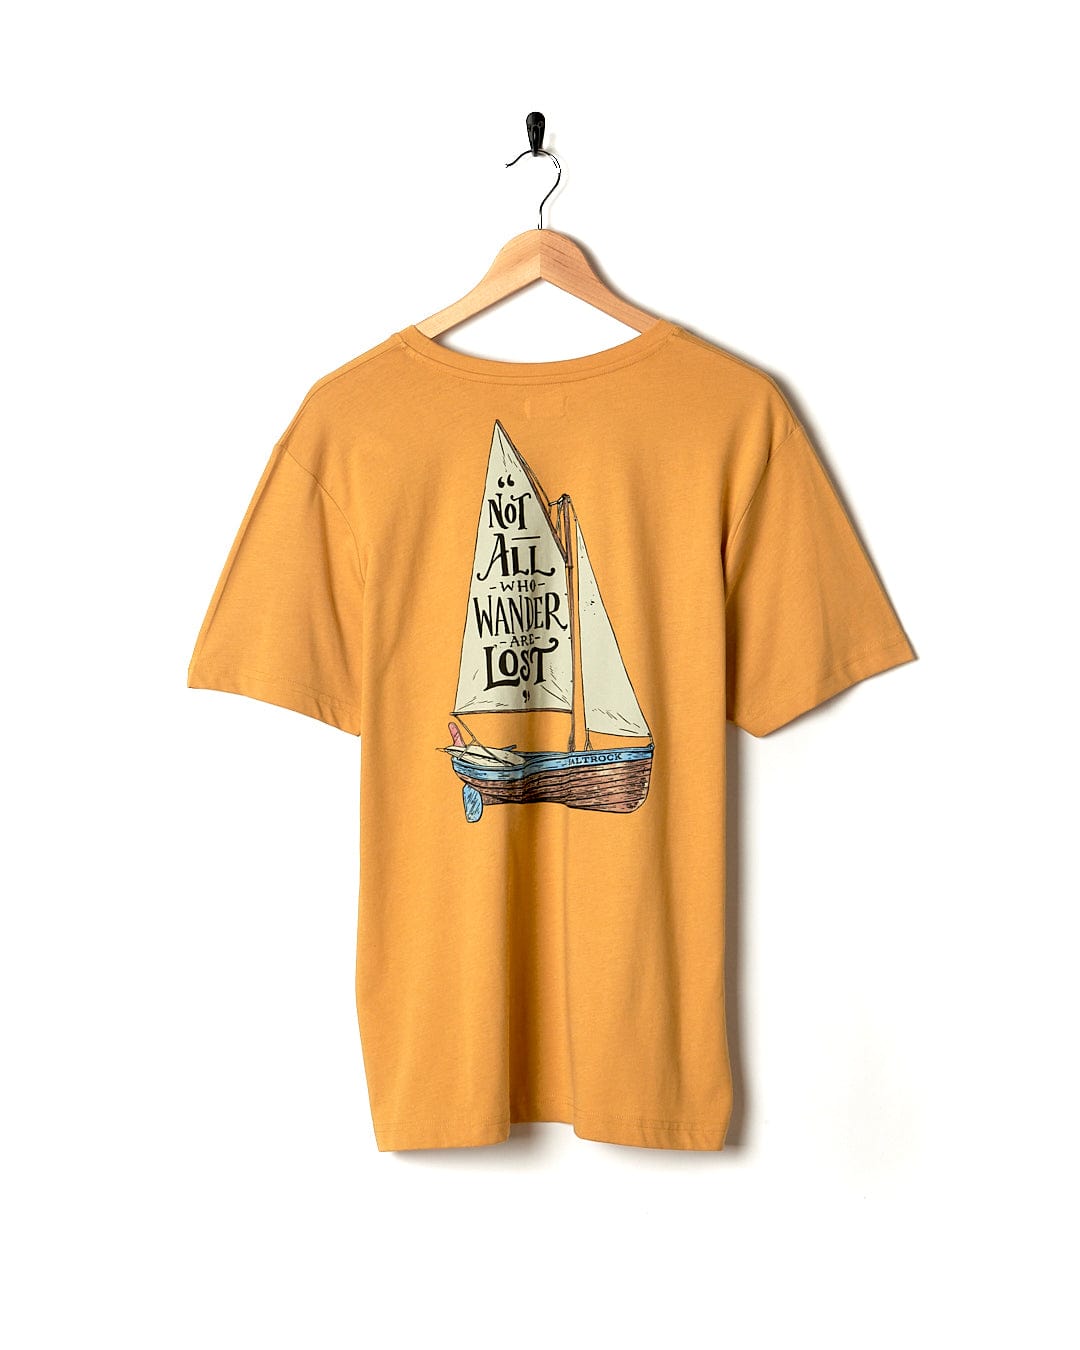 A Saltrock Lost Ships - Mens Short Sleeve T-Shirt - Yellow with a sailboat on it.